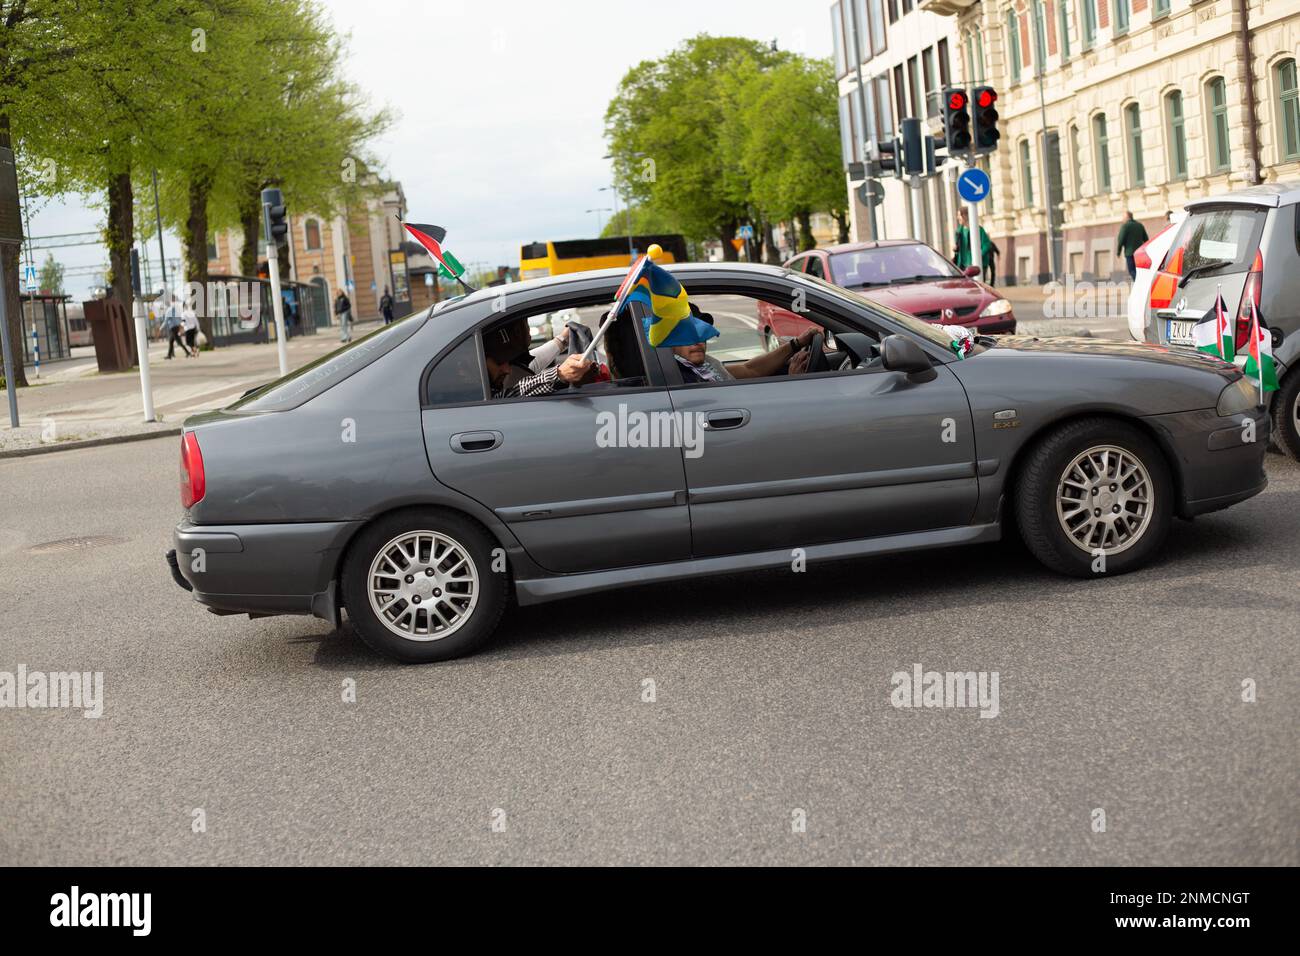 KRISTIANSTAD, SWEDEN - MAY 14, 2021: Car with Swedish and Palestinian flags during protest against Israels new attack on Gaza Stock Photo